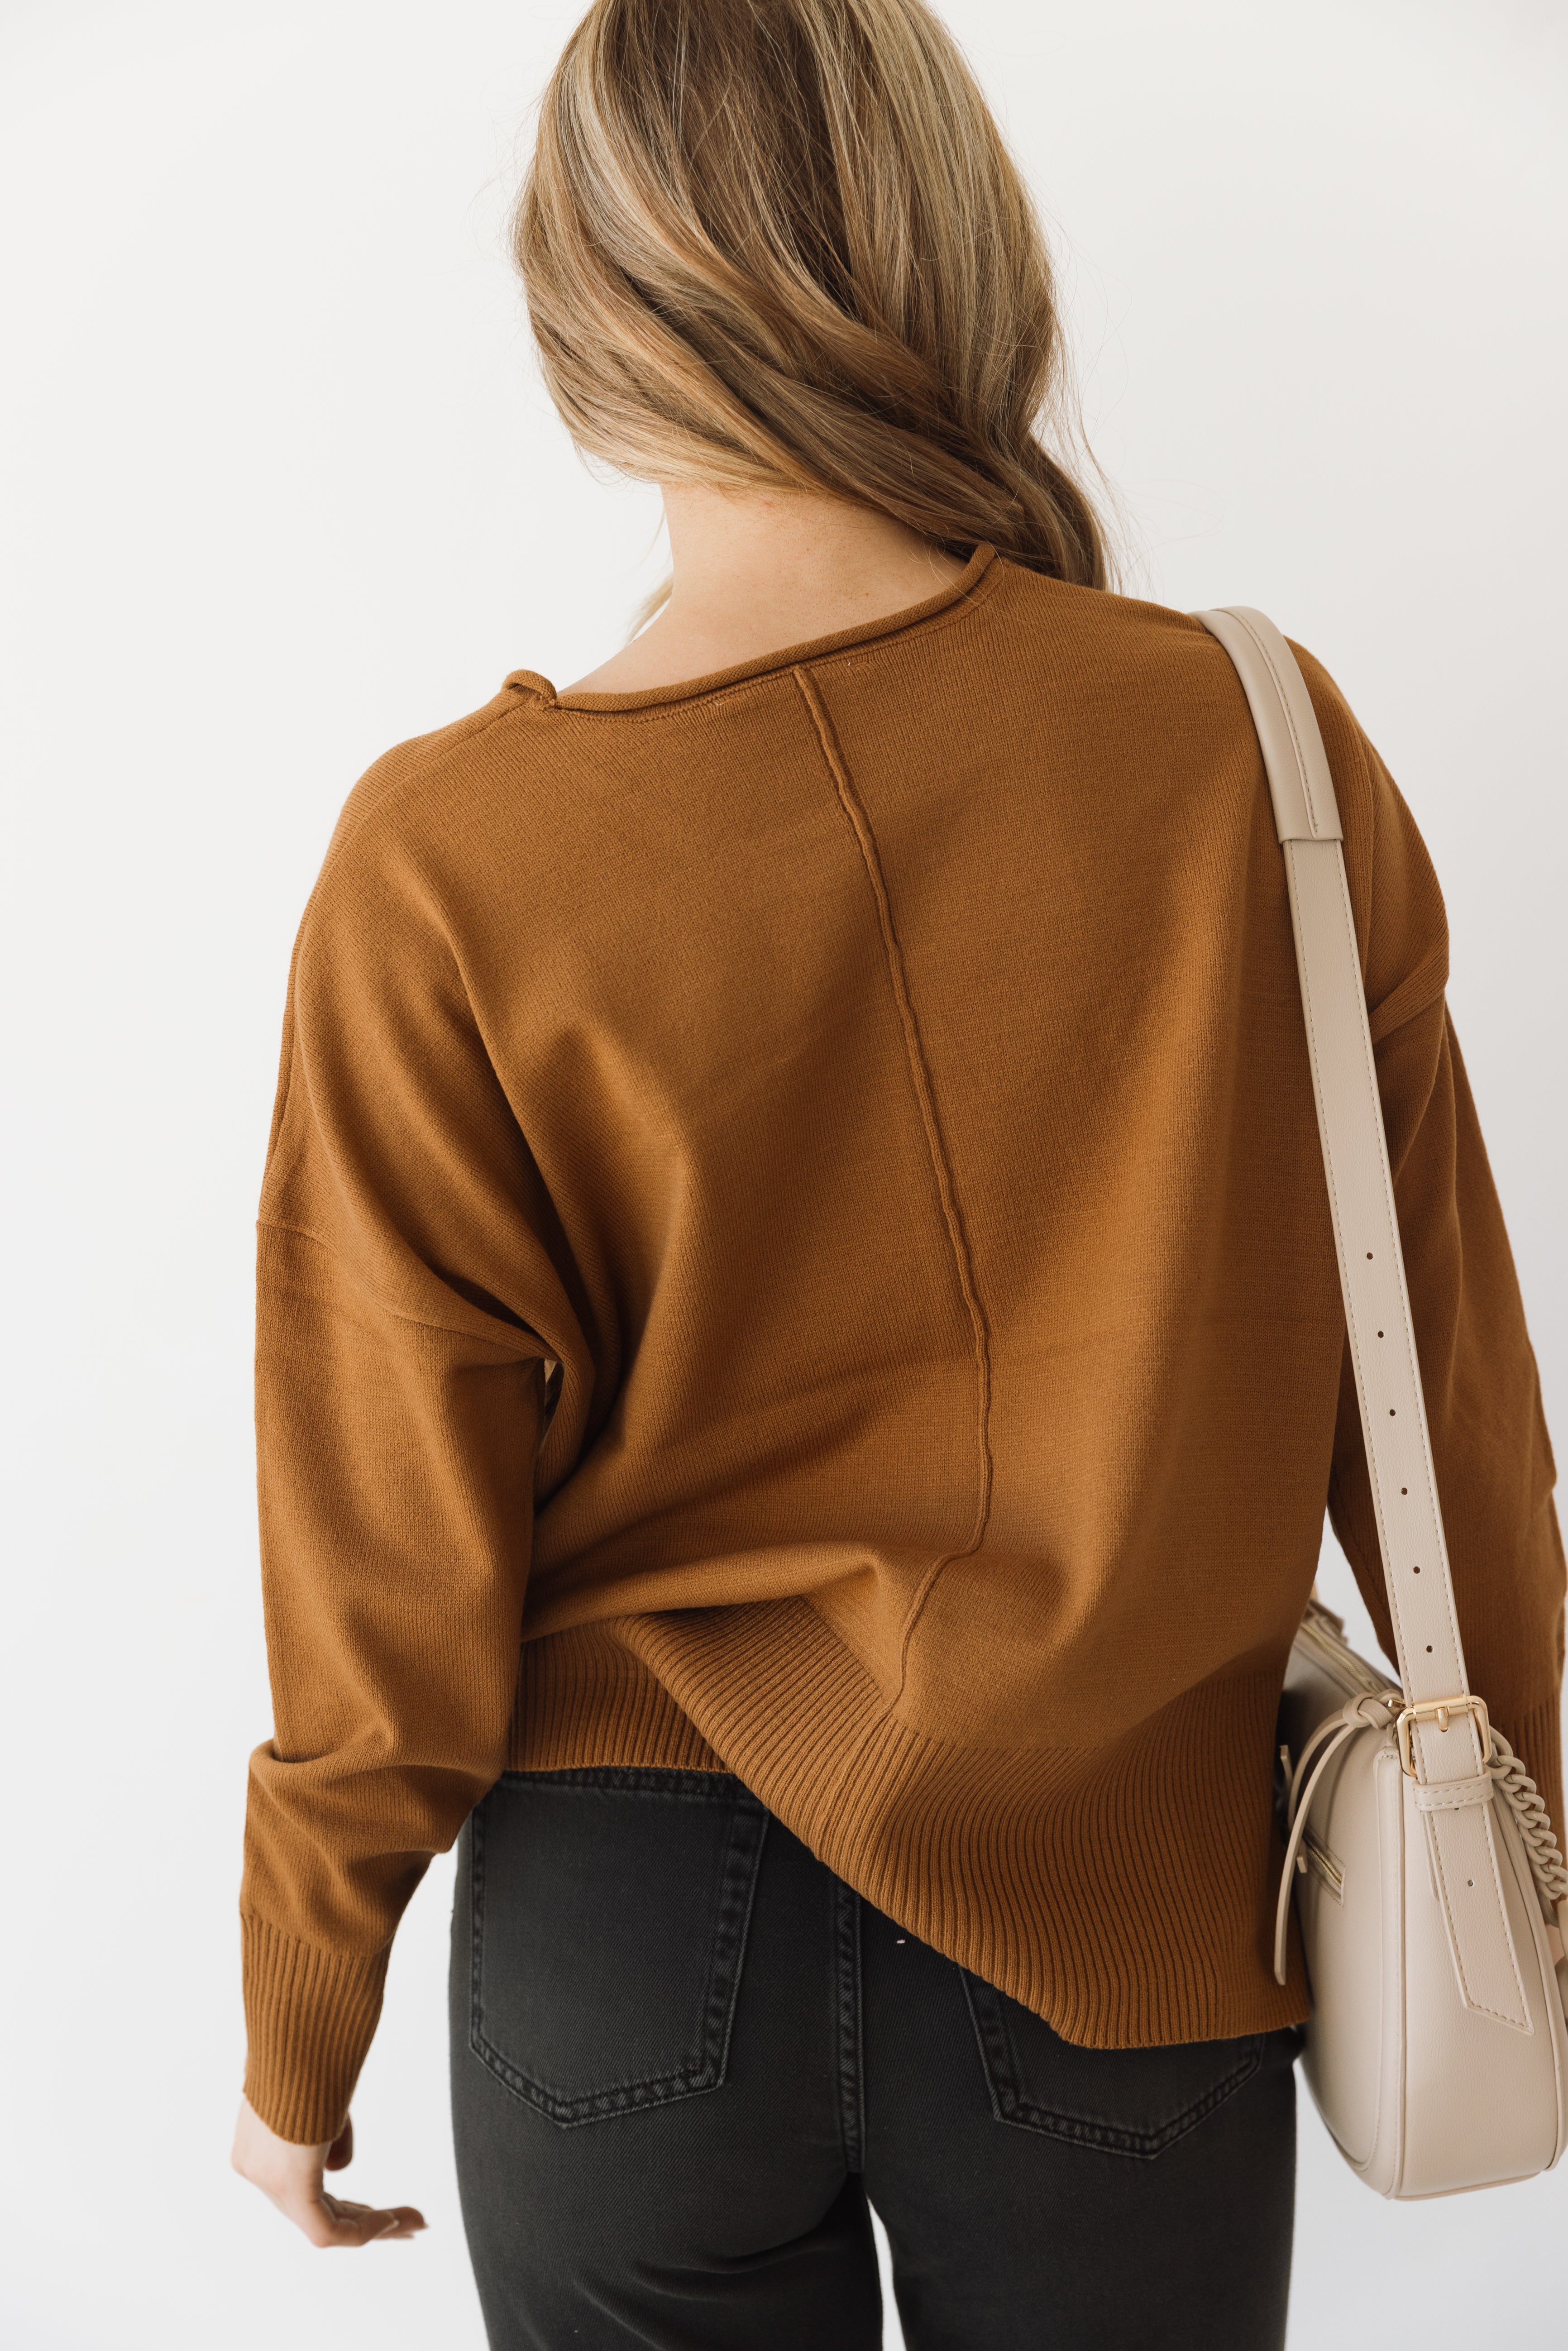 Unbothered Sweater-Brown